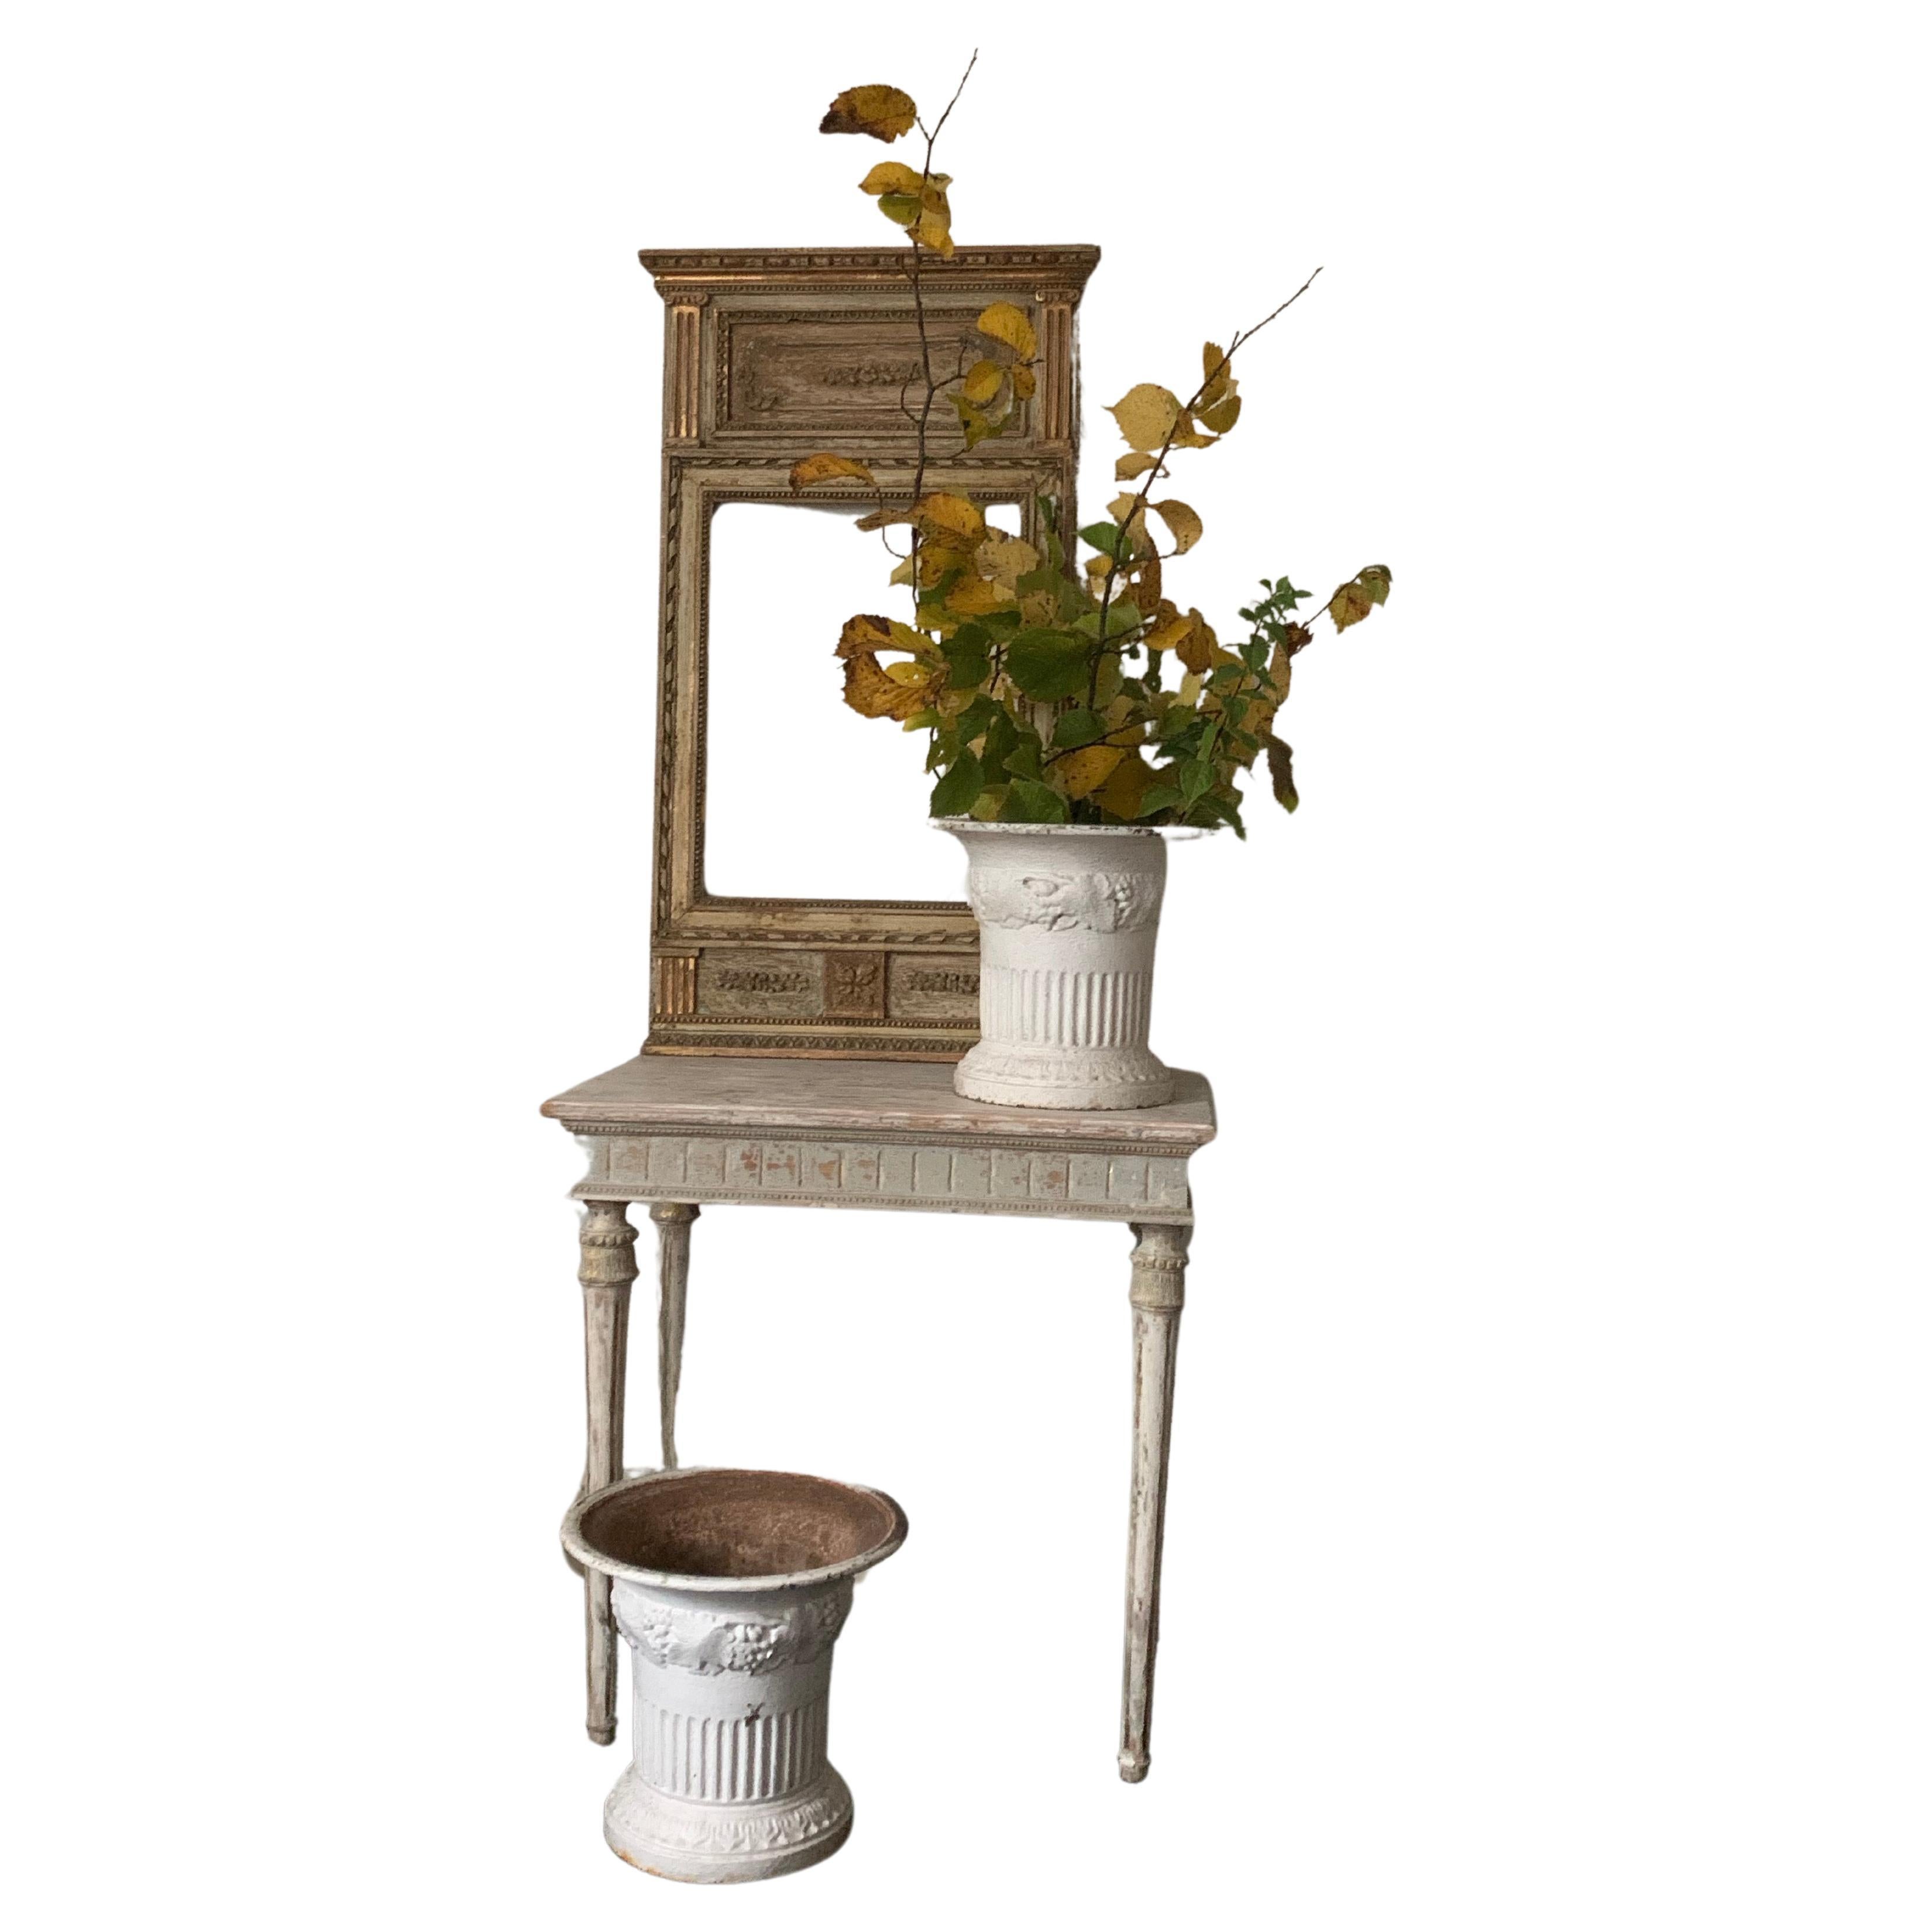 A gustavian table made in Sweden about 1800. The secondary color has been removed by hand and the rest is original color.    
                              
The iron urns are a pair made in France in the second half of 19th century. The urns size